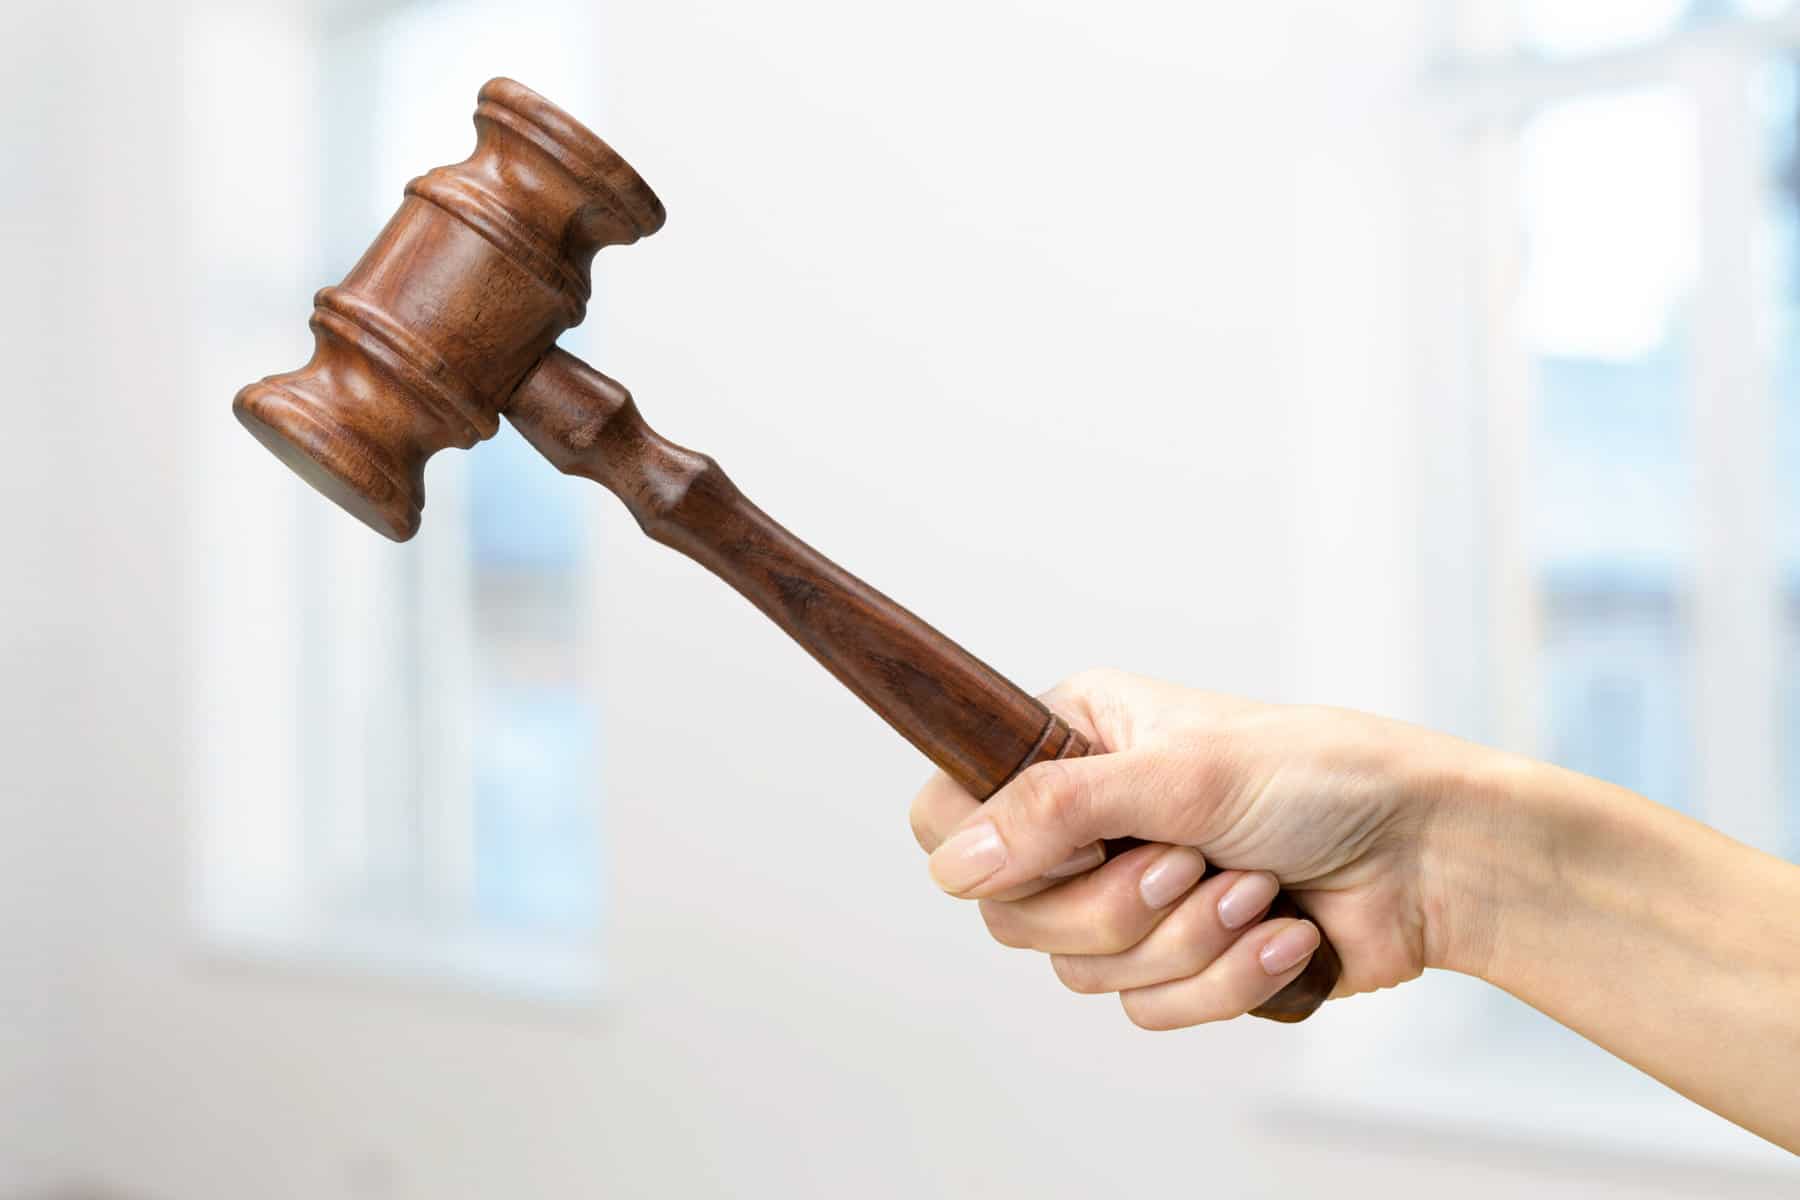 A hand holds a gavel in mid-air.